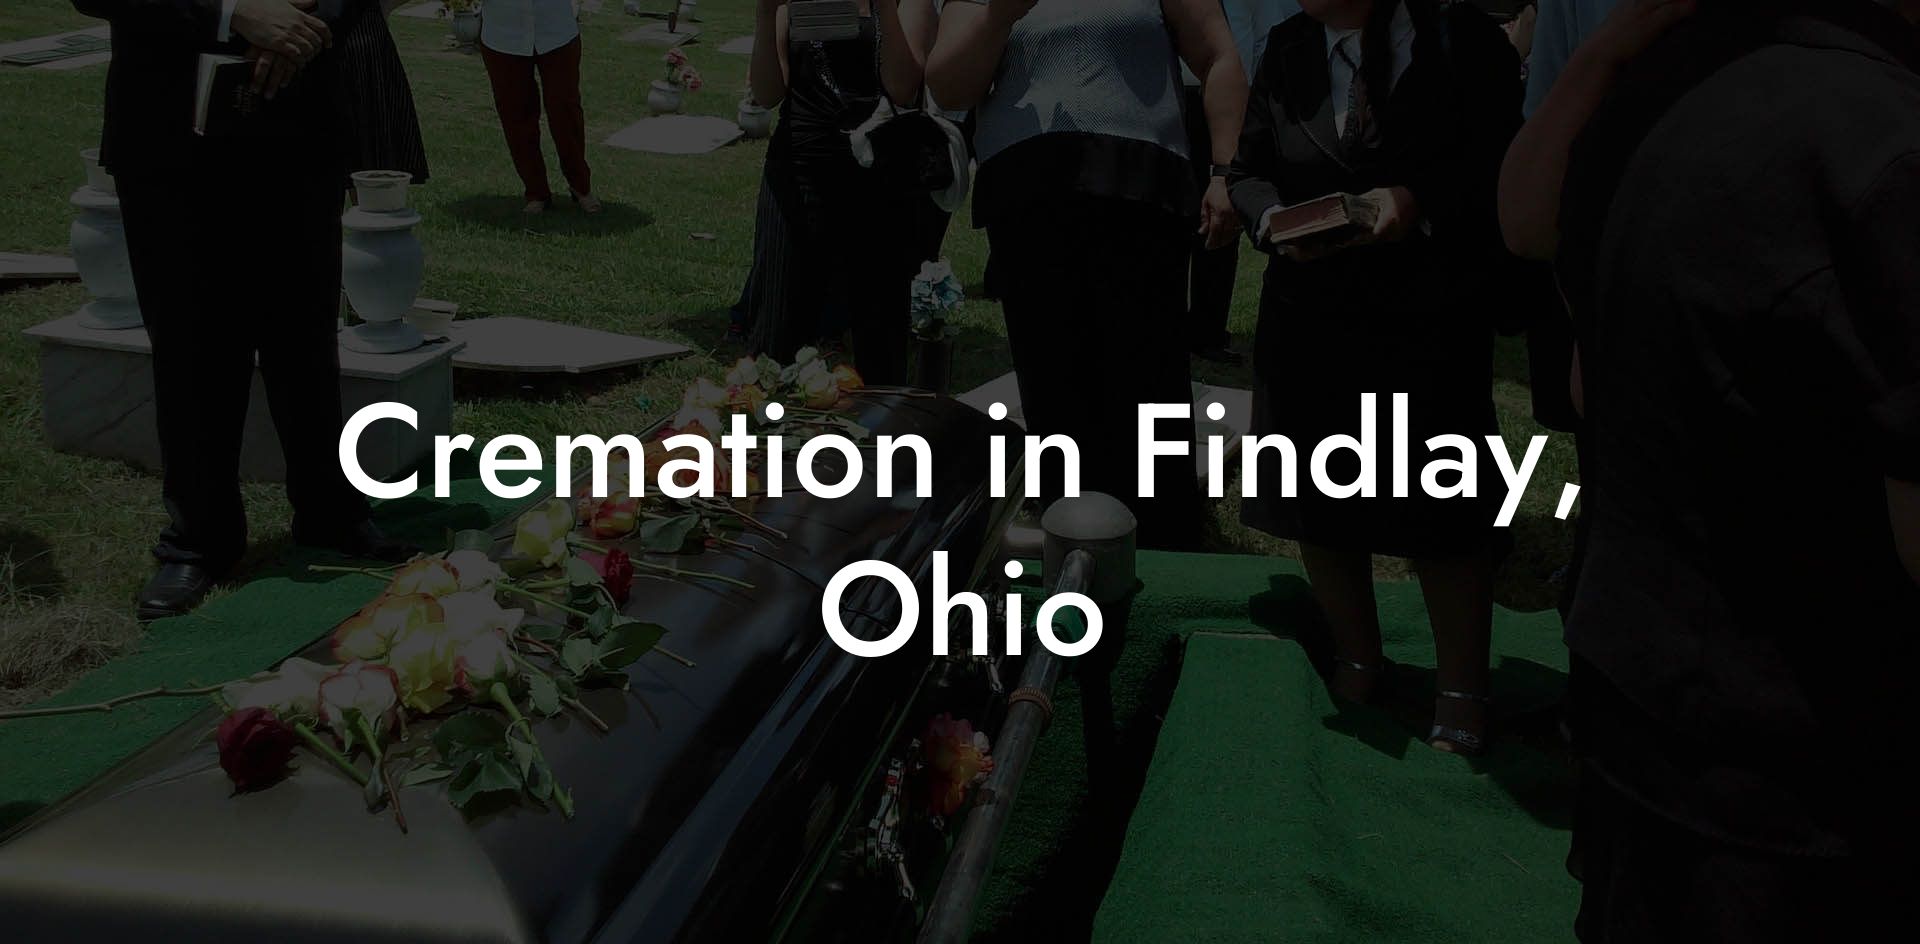 Cremation in Findlay, Ohio